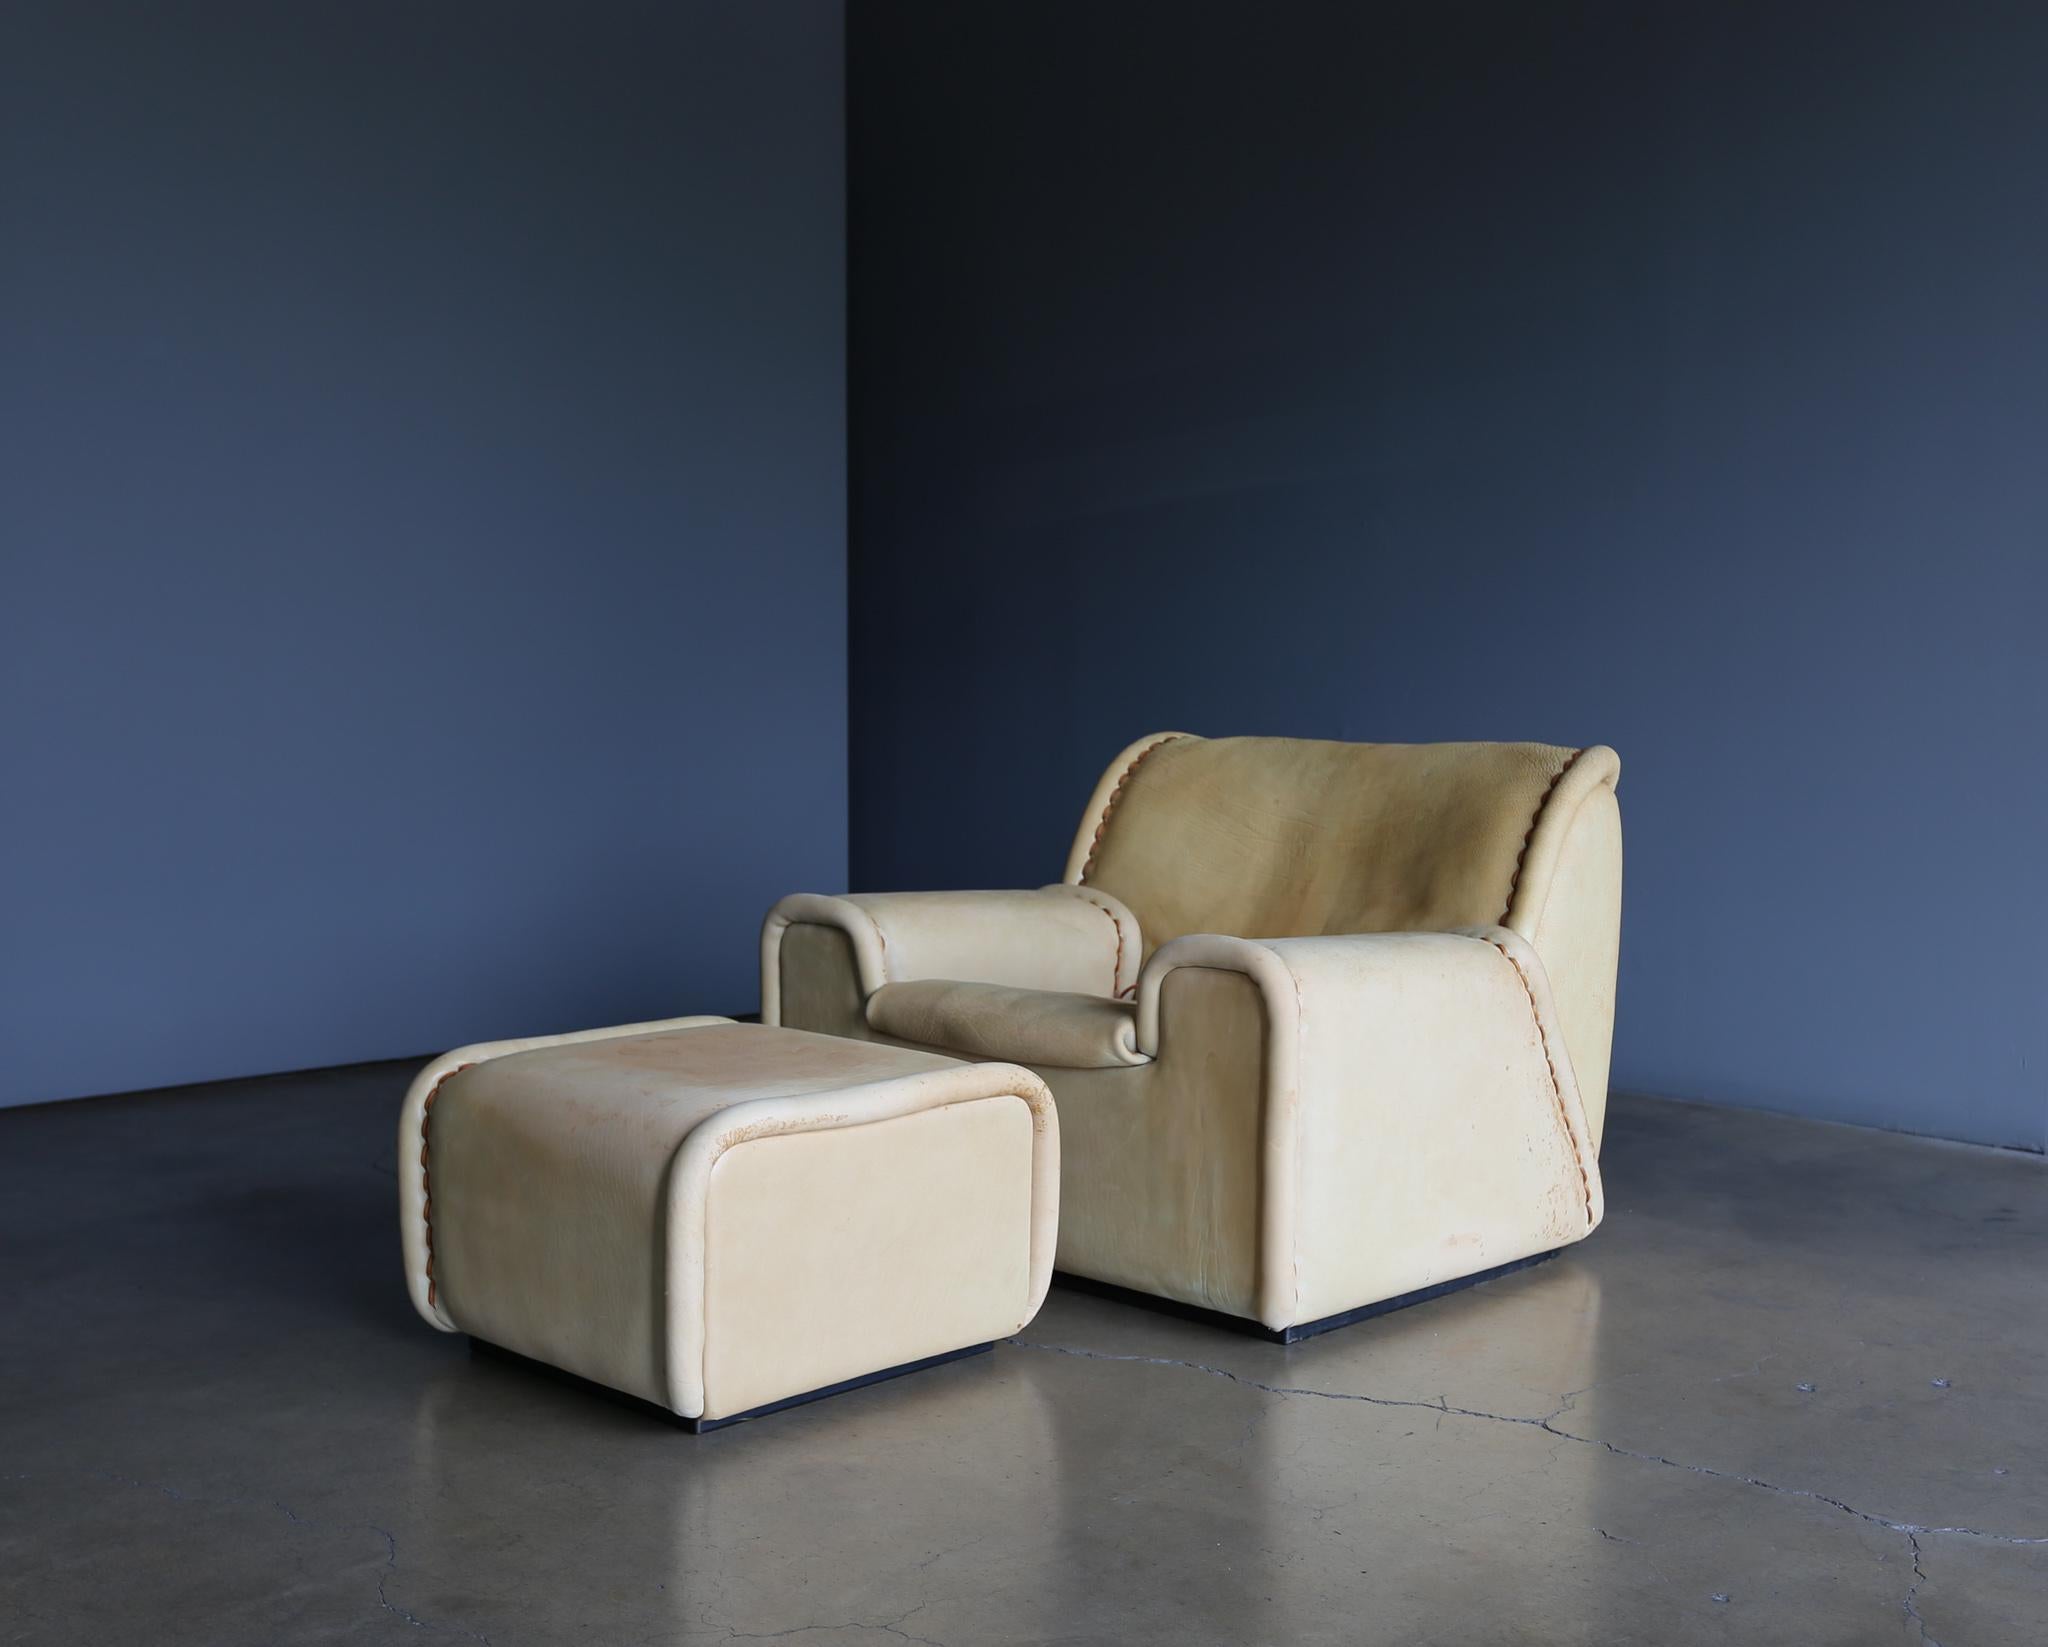 Ernst Lüthy "Sitting Bull" Lounge Chair and Ottoman for De Sede, 1982